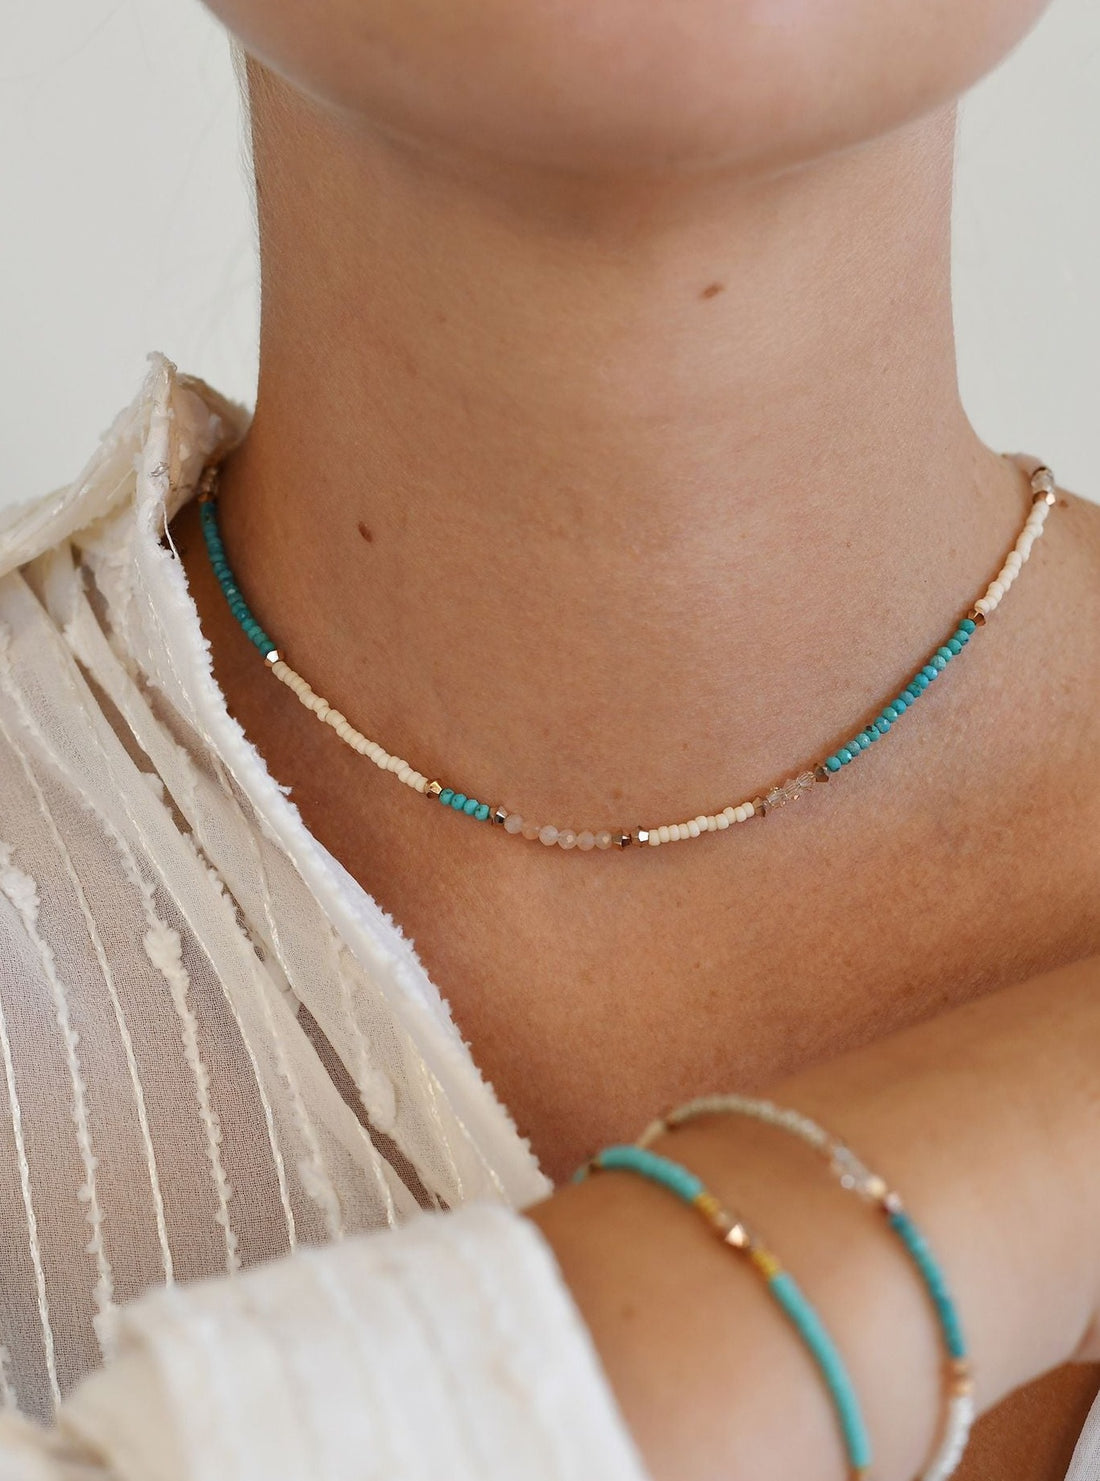 Utulivu Turquoise Beaded Necklace - PEARL/TAUPE/ROSE GOLD/TURQUOISE/TRANSLUSCENT PINK/HONEY